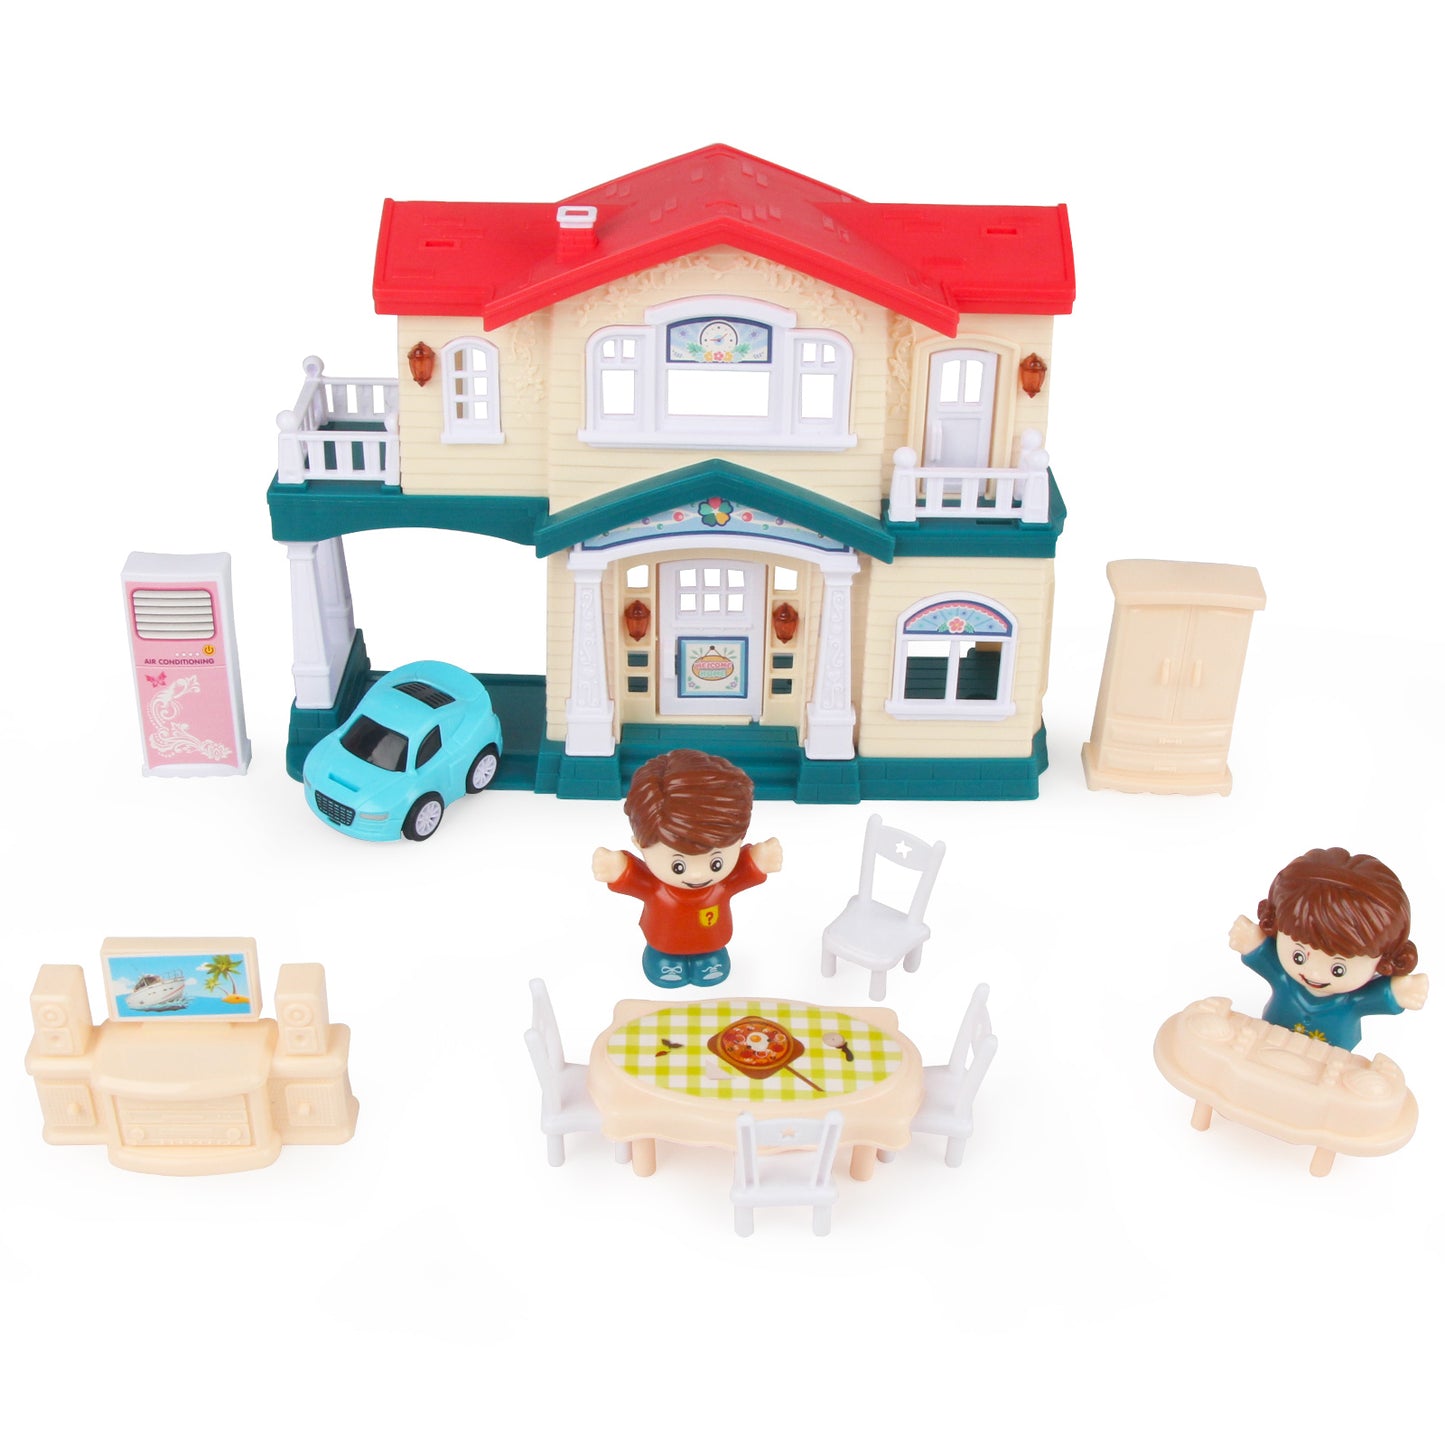 Joyfia 2-Story Dollhouse, Doll House with 2 Figures and Furniture, Dreamhouse with Doorbell & Light for Role Pretend Play, 13 Piece Toddler Playhouse Gift Toys for 3-8 Years Old Girls Boys Kids